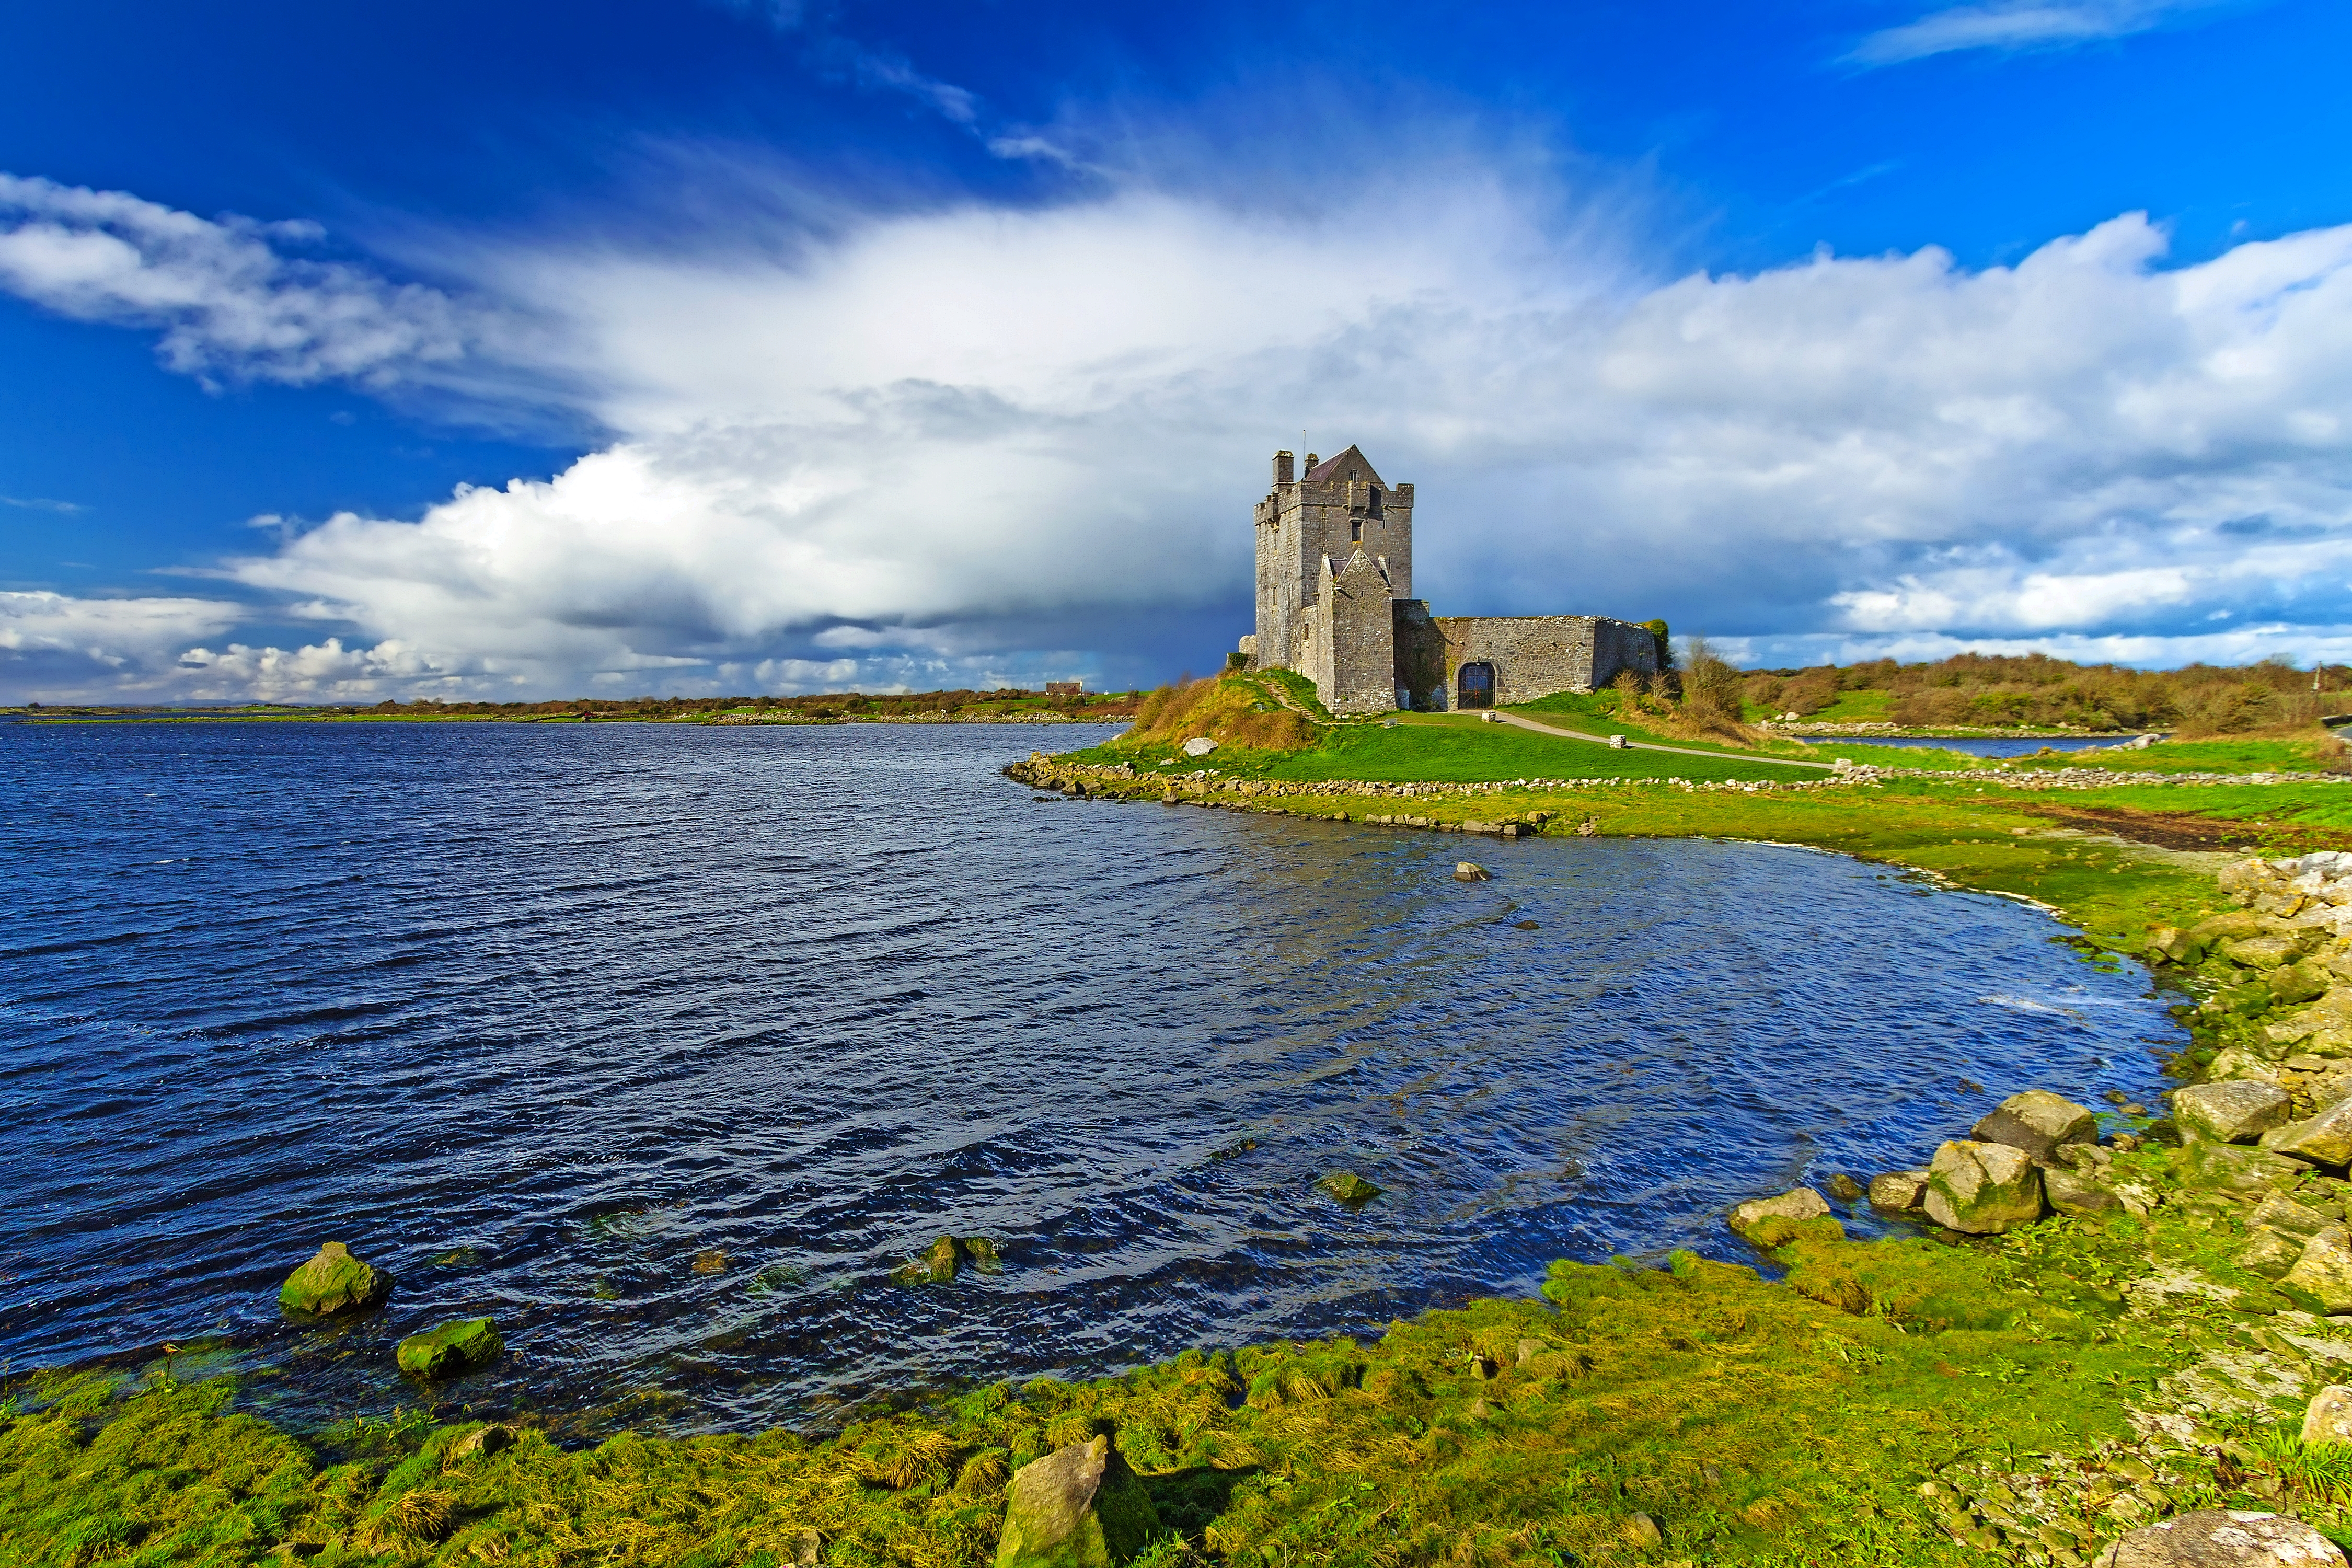 Dunguaire castle in Co. Galway, Ireland